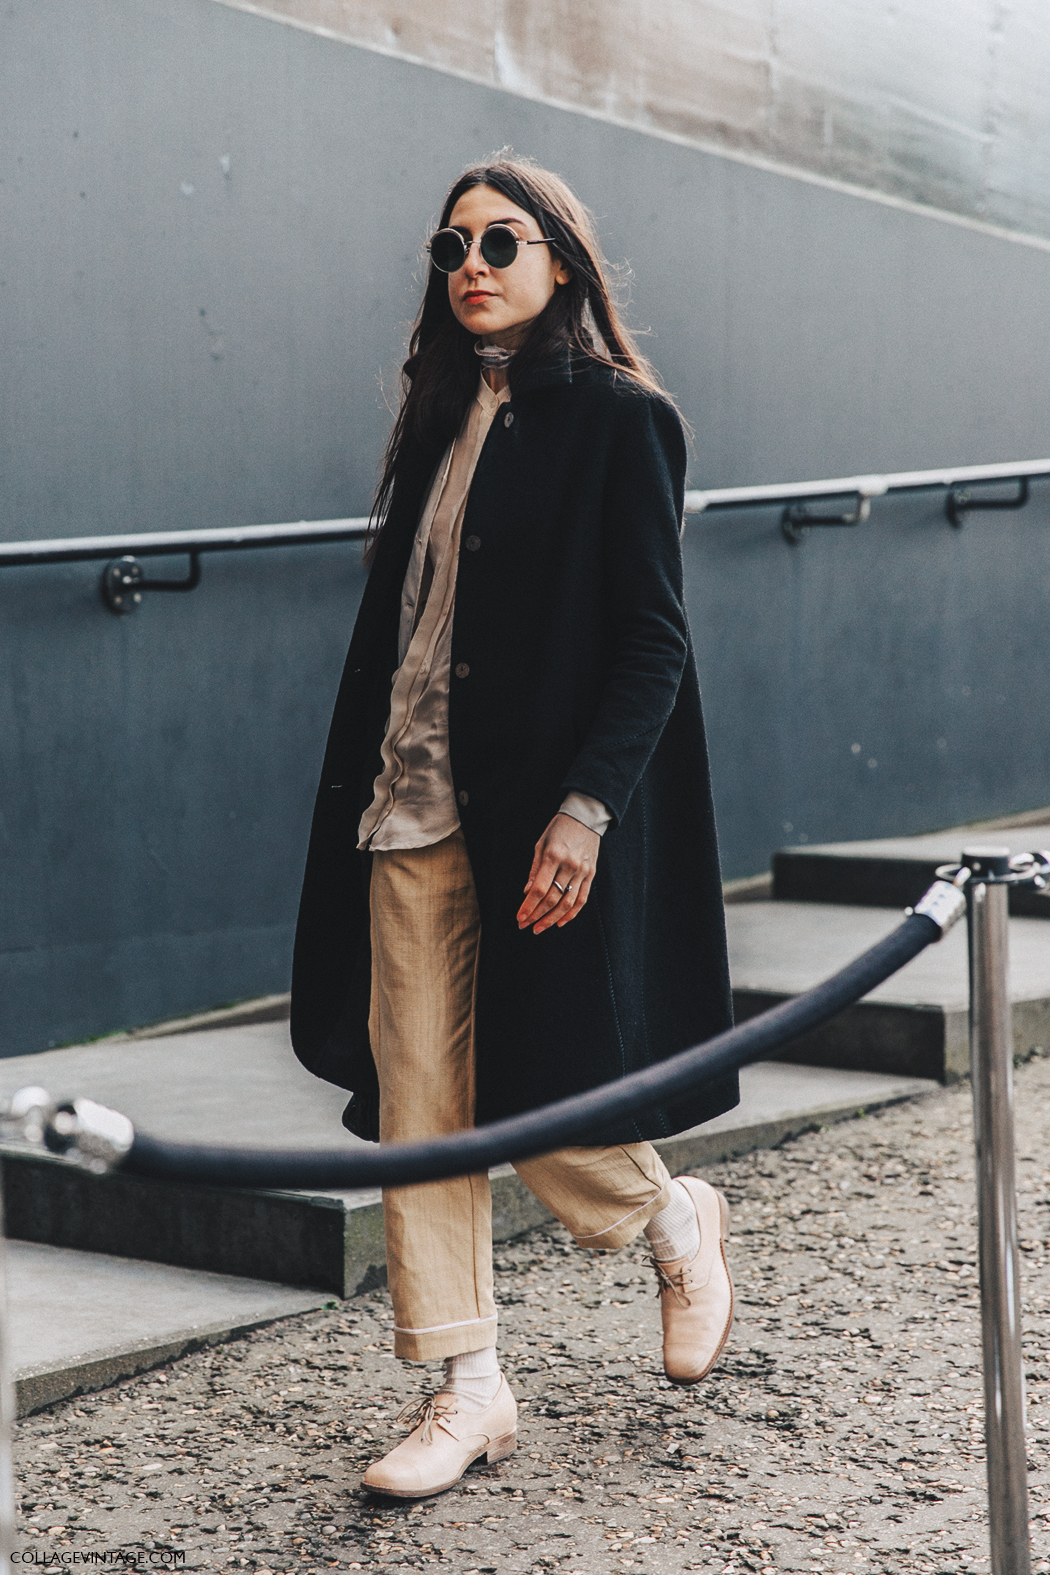 Street Style | From Fashion Week: 18 Images of Inspiration | Cool Chic ...